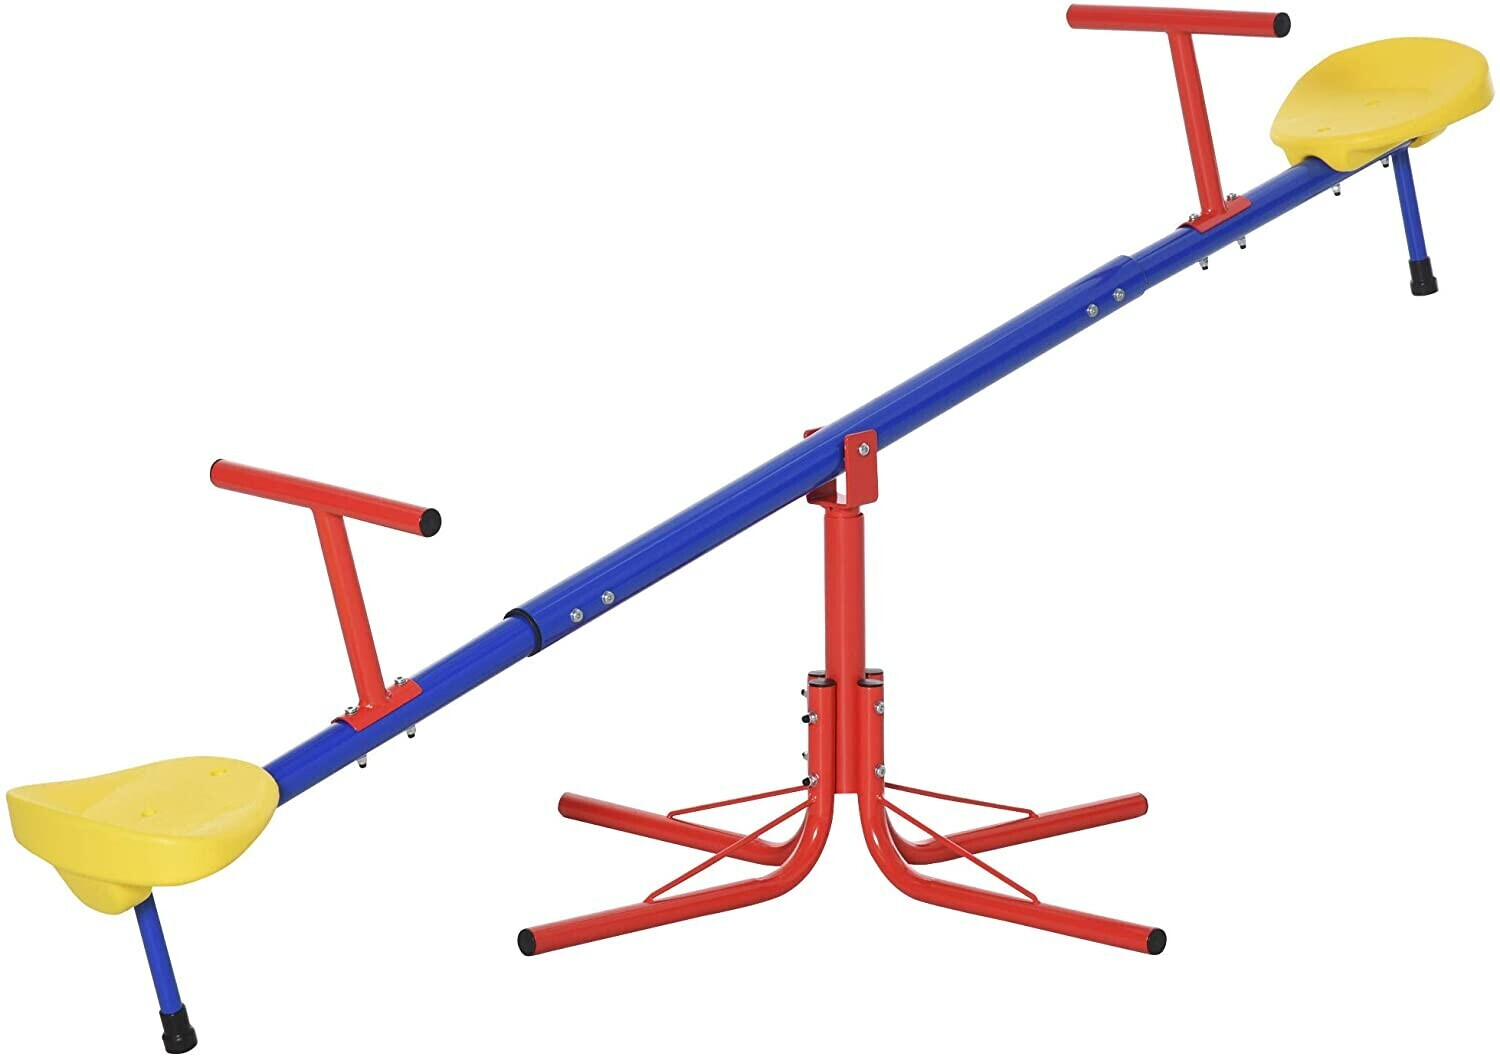 Photos - Other Kids Offers Outsunny 360 Degree Seesaw Swivel Teeter Totter Blue Yellow Red 